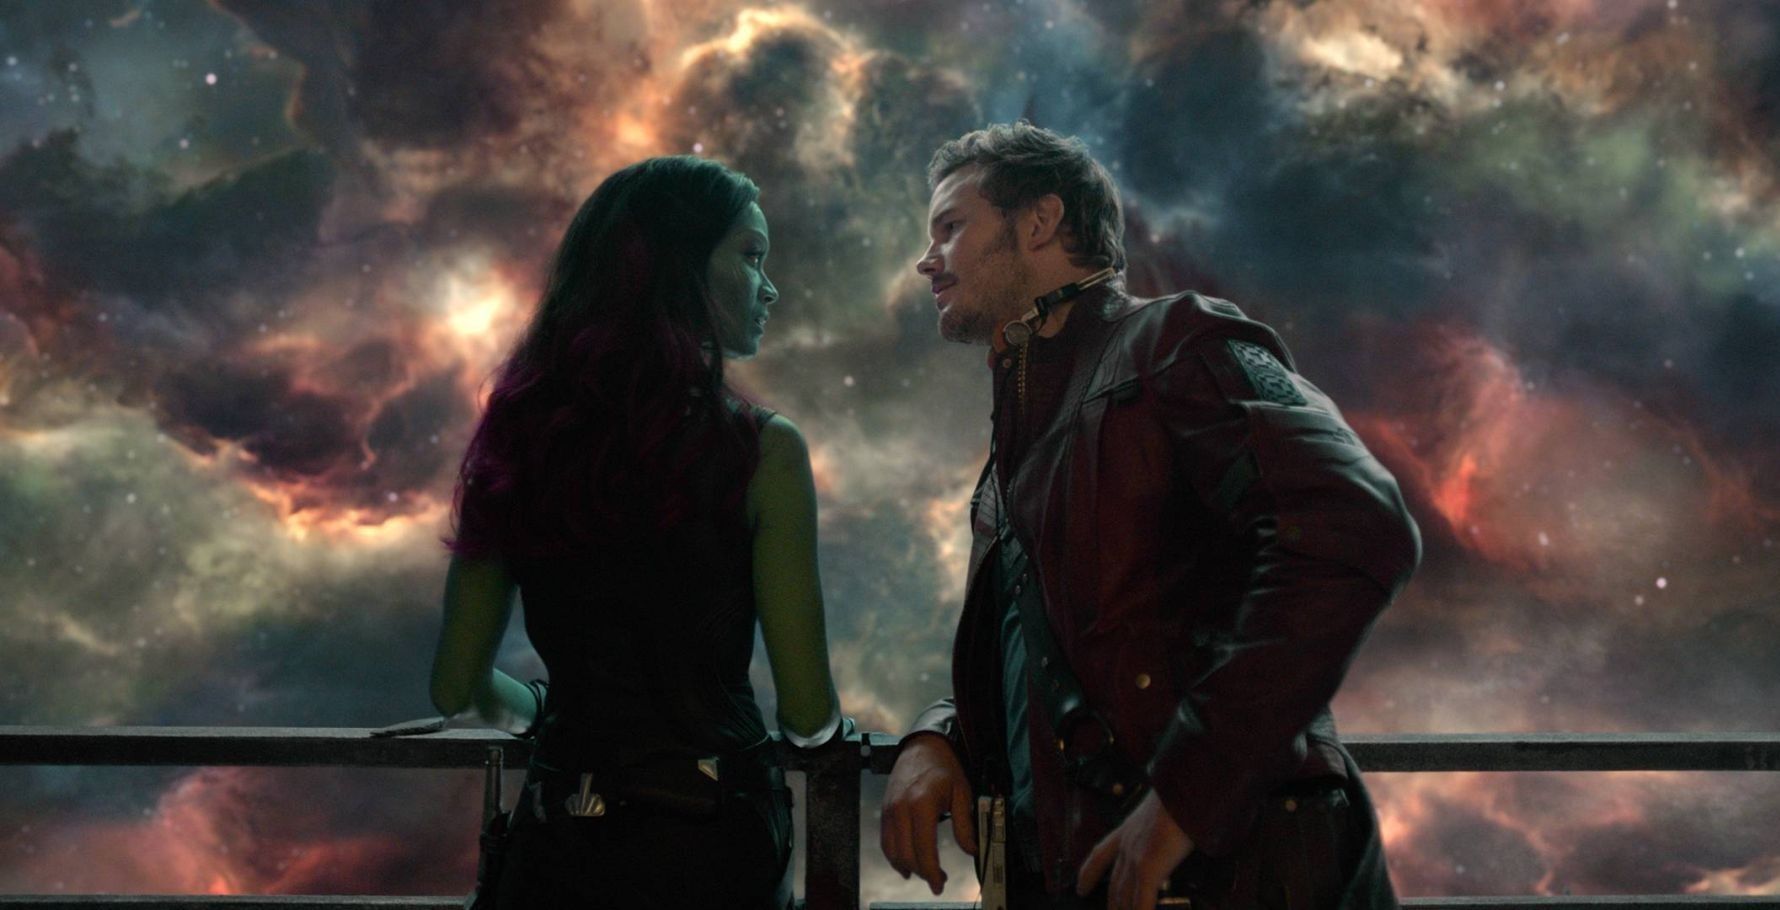 MCU Peter Quill and Gamora in Guardians of the Galaxy